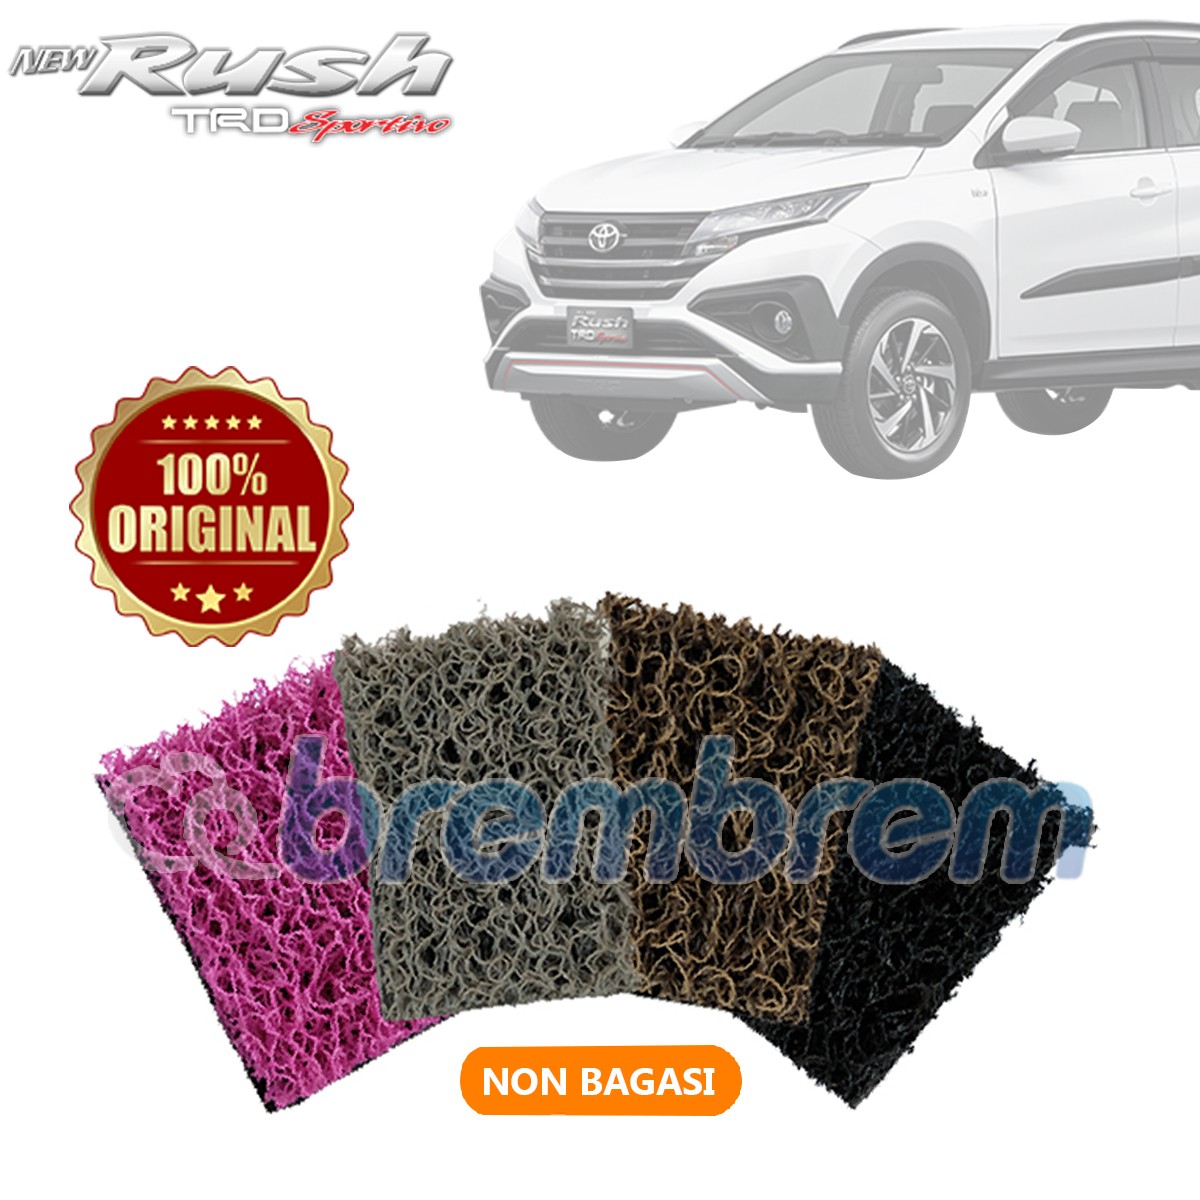 KARPET COMFORT DELUXE NON BAGASI TOYOTA ALL NEW RUSH 2018